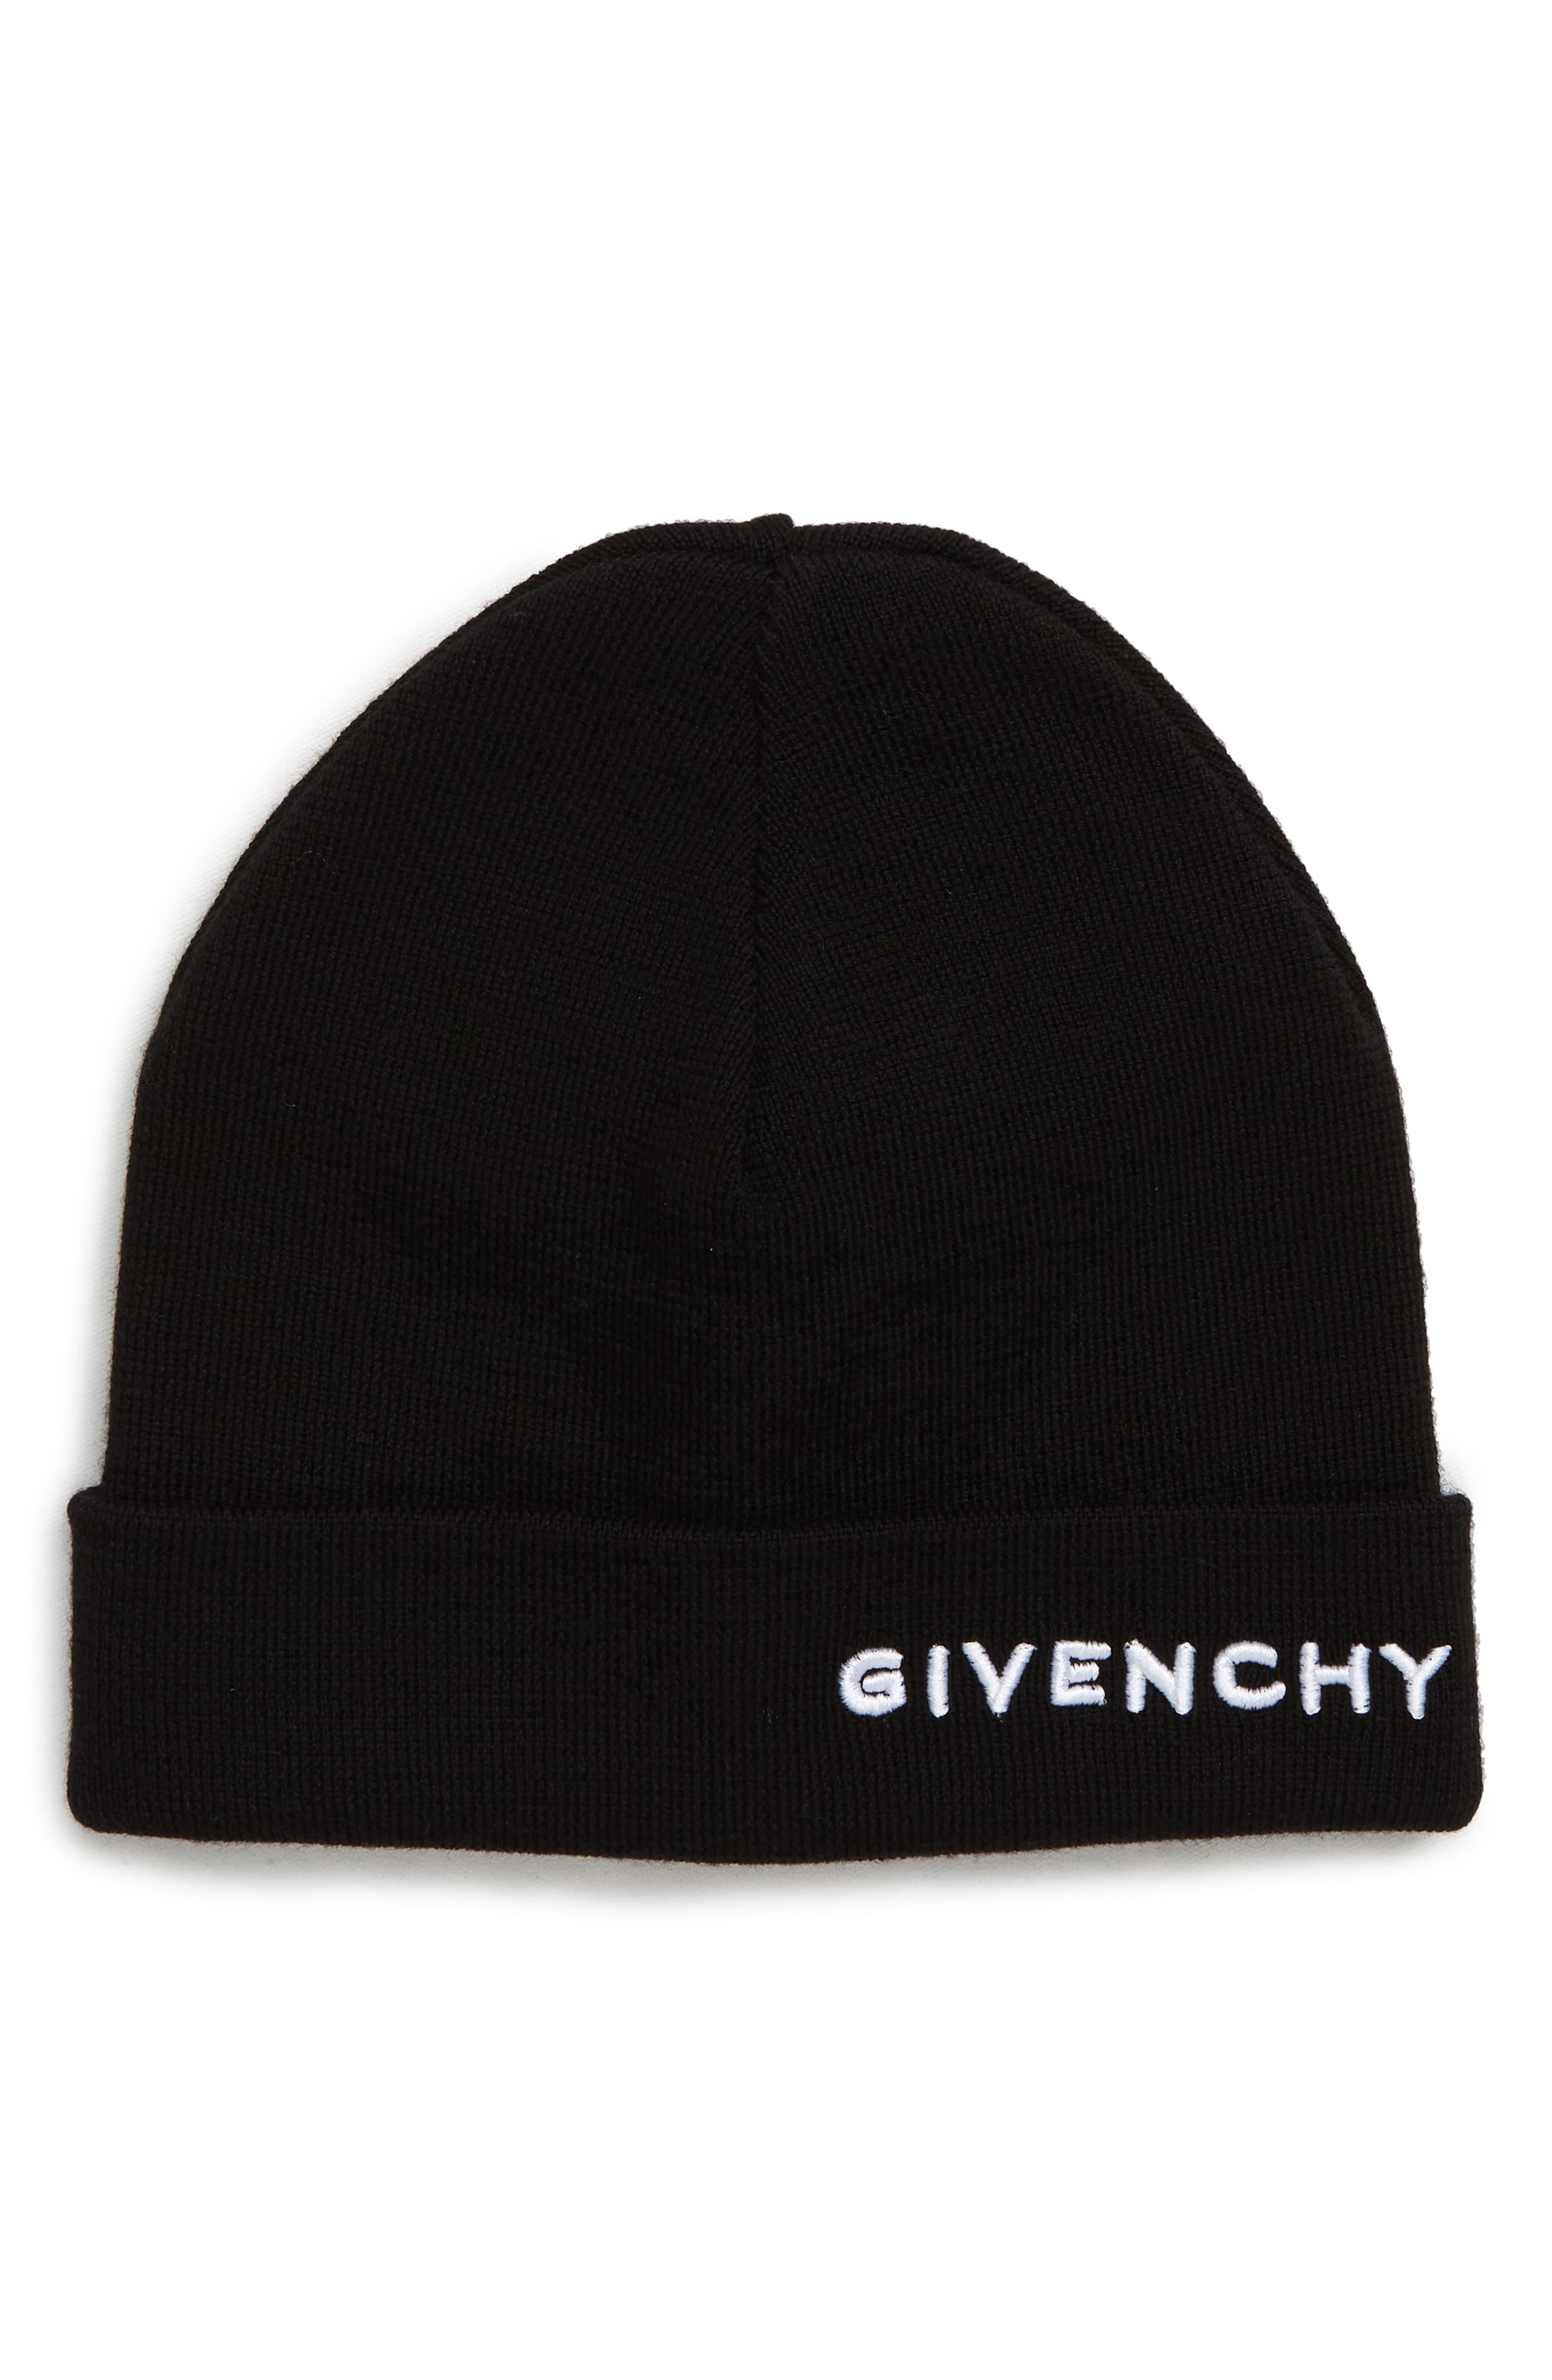 Givenchy Wool Embroidered Logo Beanie in Black White (Black) - Lyst